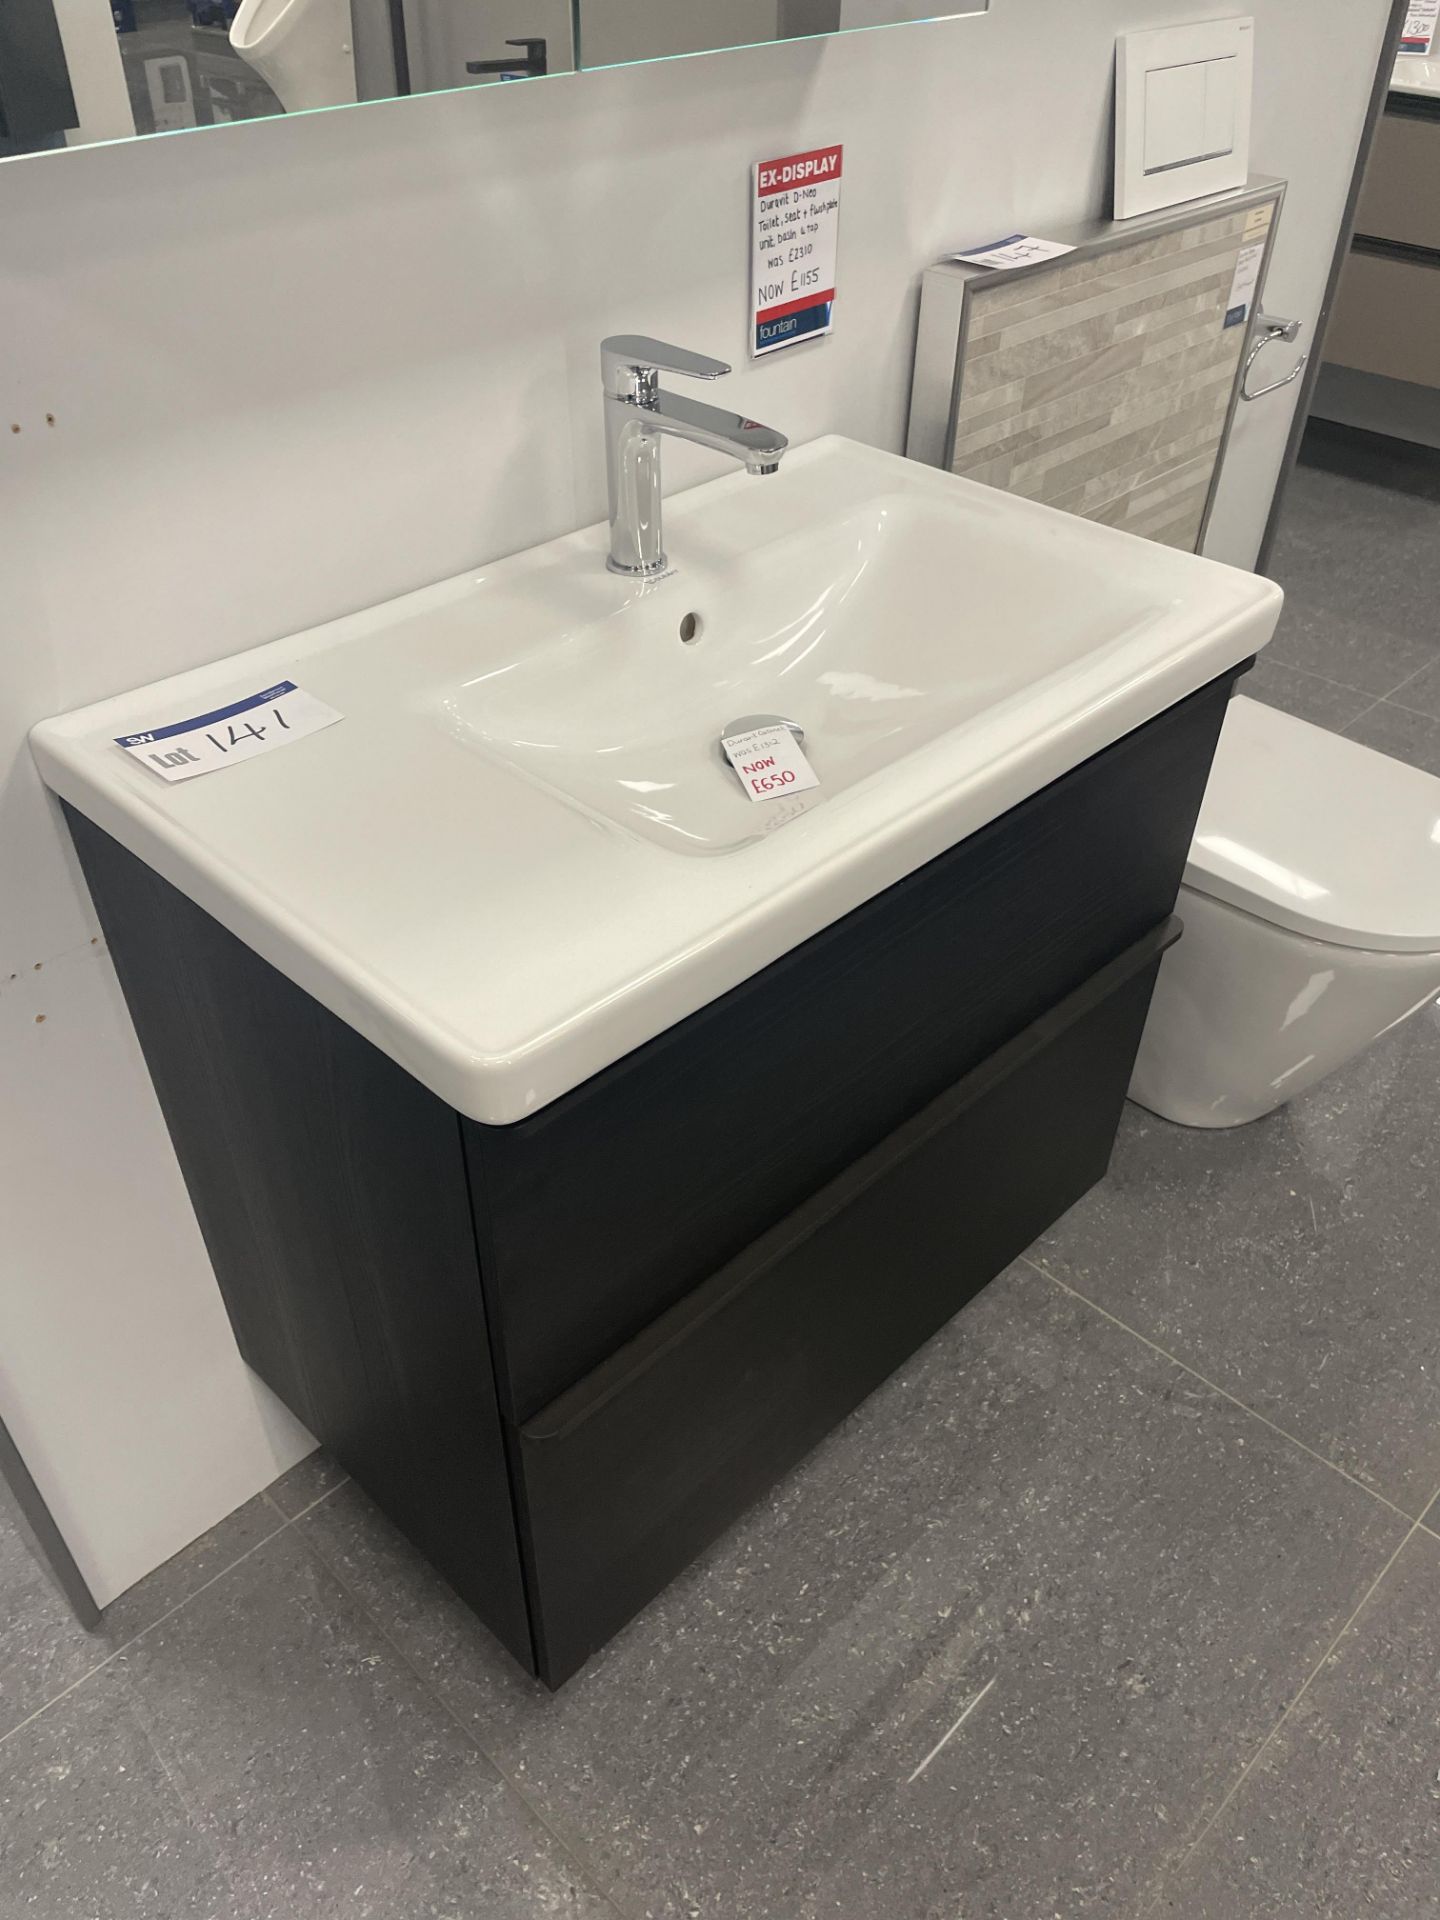 Duravit Basin Unit, with tap, approx. 800mm x 480mm Please read the following important notes:- ***